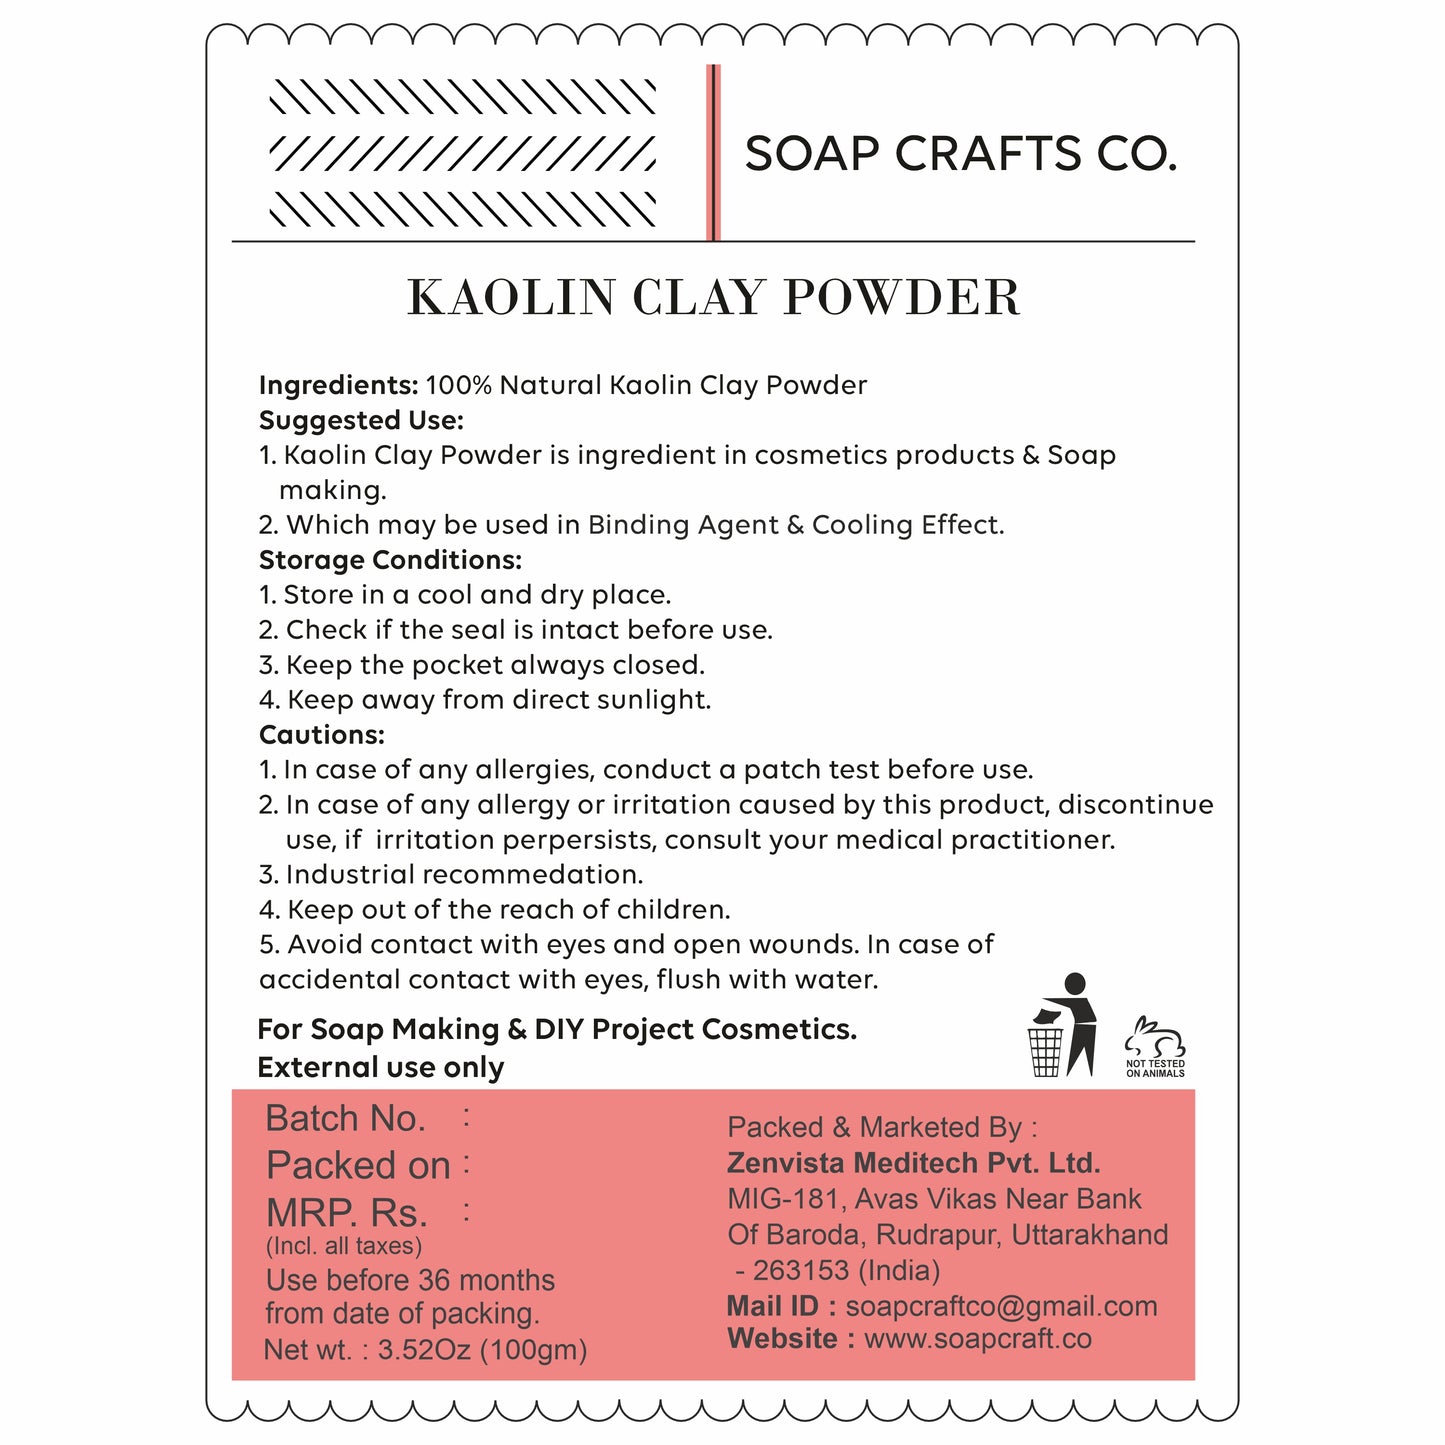 Soap Crafts Co. Kaolin Clay Powder for DIY Projects, Soap Making and Cosmetic Making